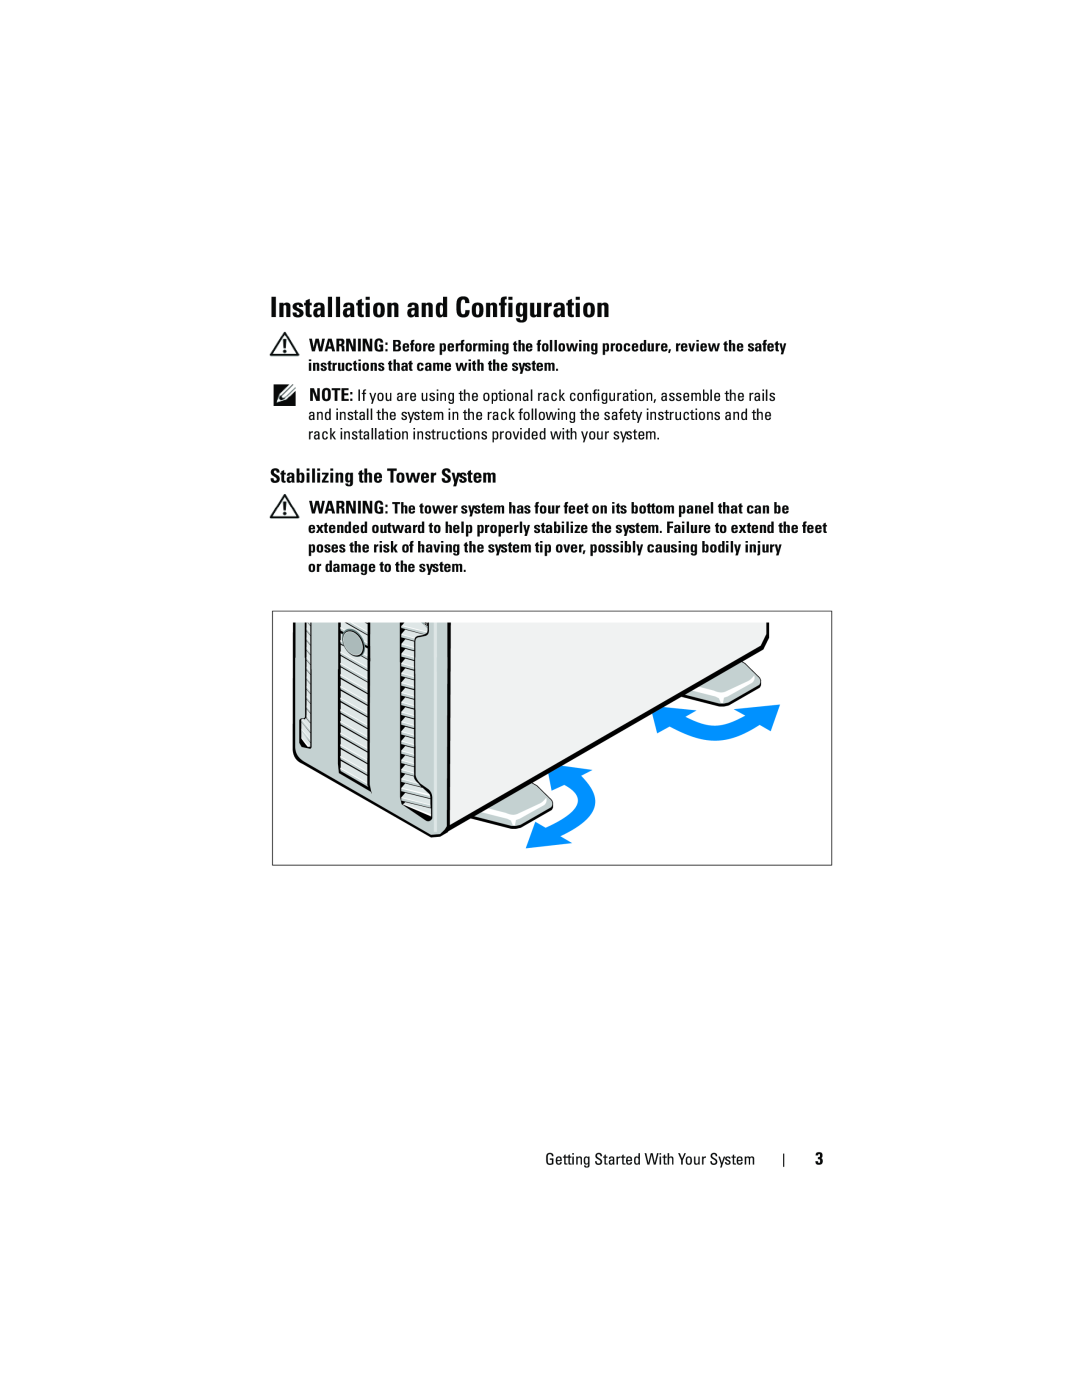 Dell N732H, E04S001 manual Installation and Configuration, Stabilizing the Tower System 